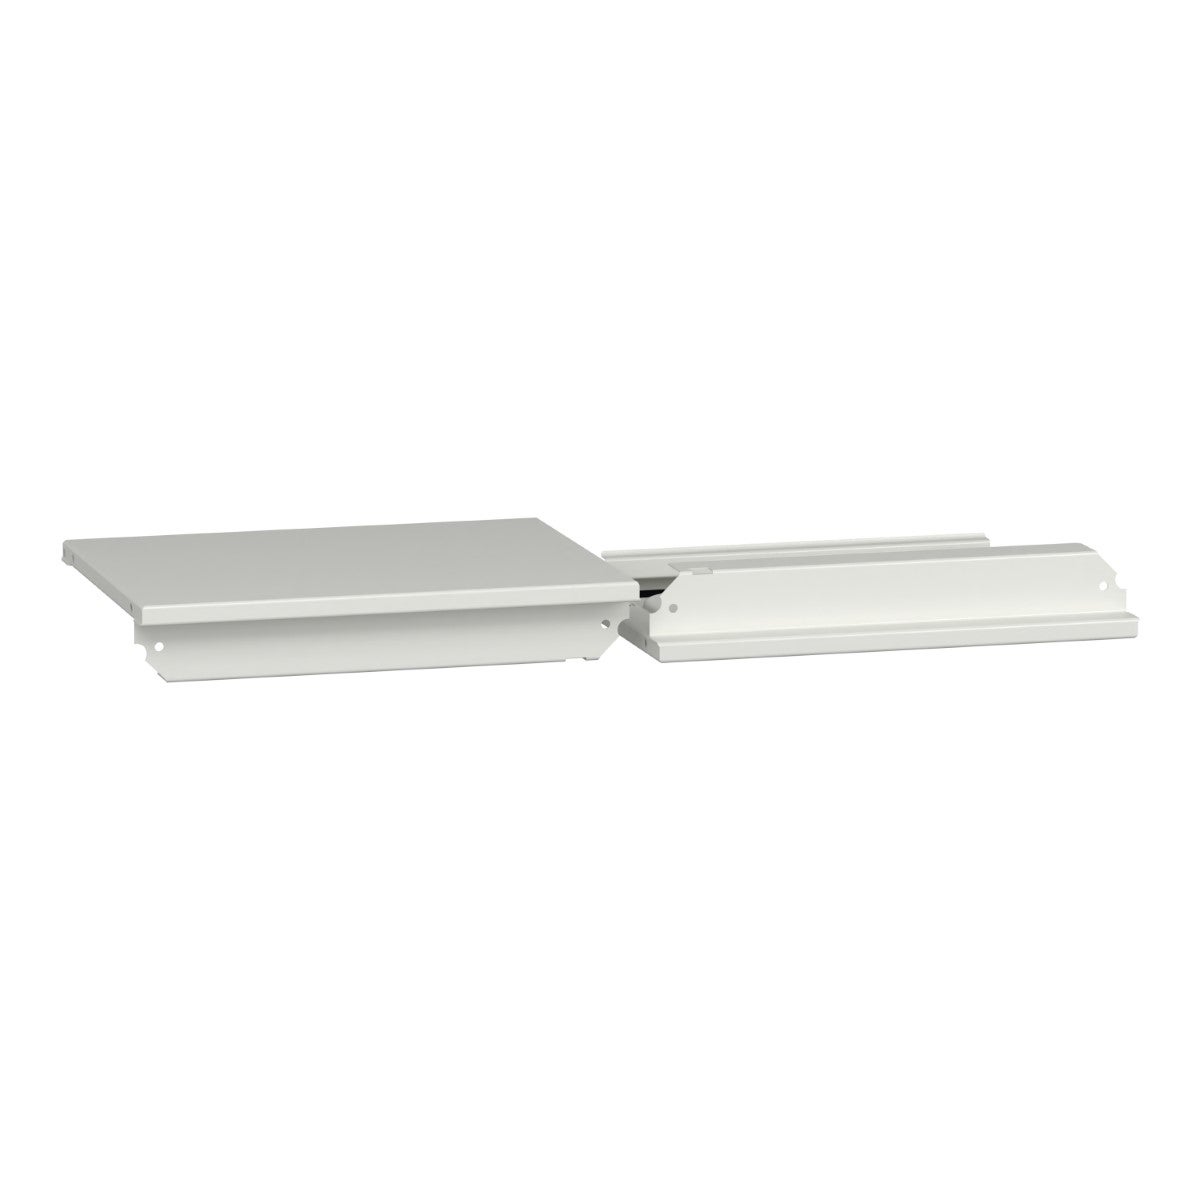 Top/bottom plate, PrismaSeT G, for extension enclosure, W 300mm, IP55, white, RAL 9003, set of 2 plates